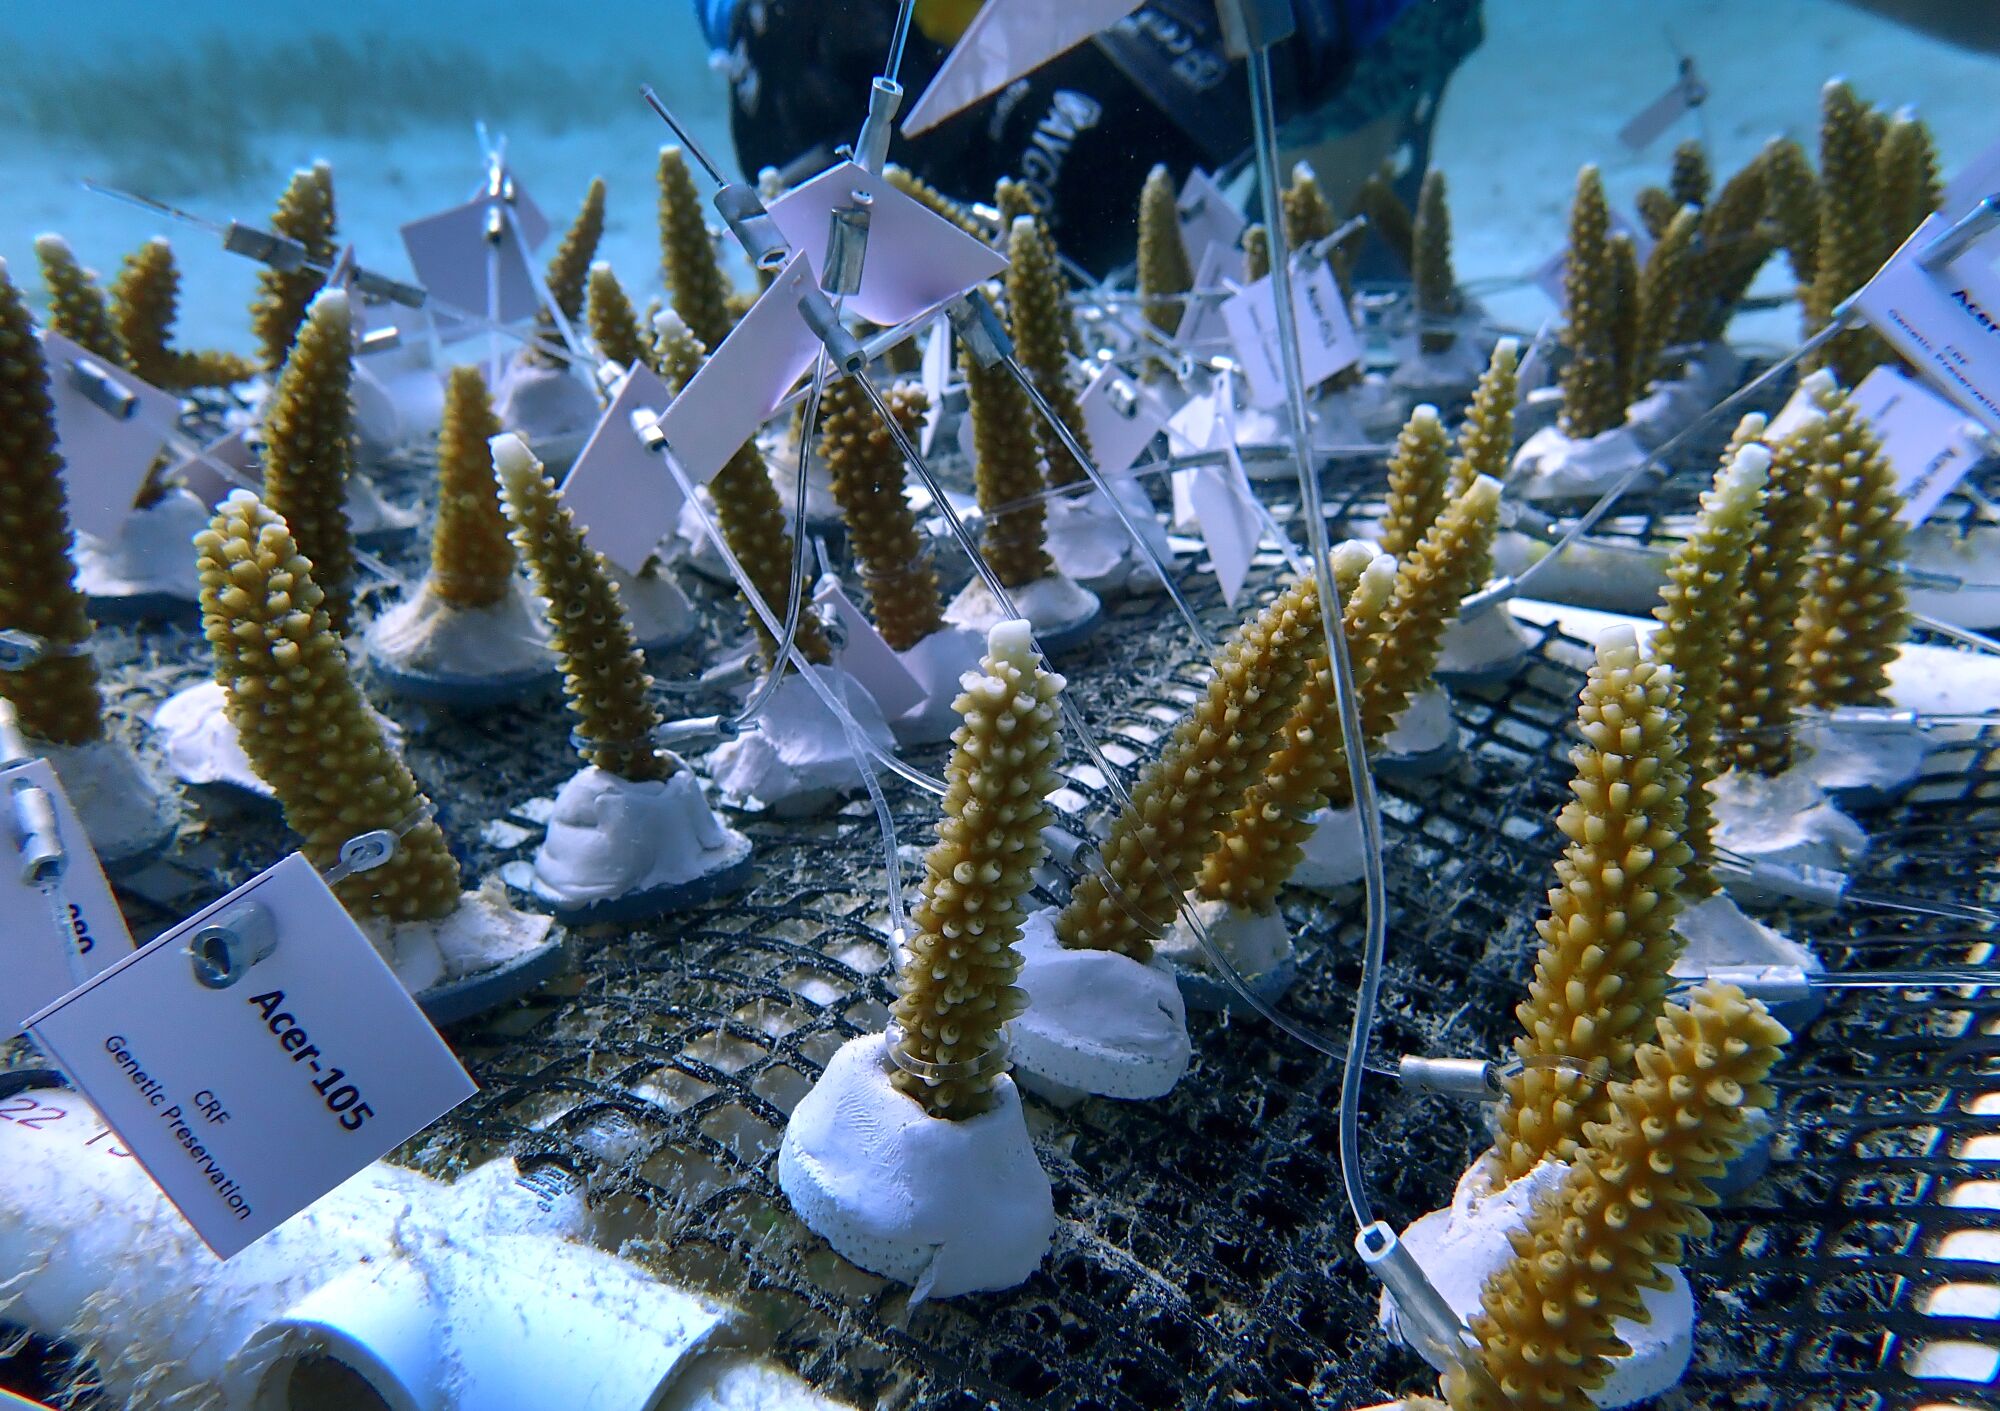 Samples of young staghorn coral retrieved from the ocean nursery are tagged and carefully documented.  